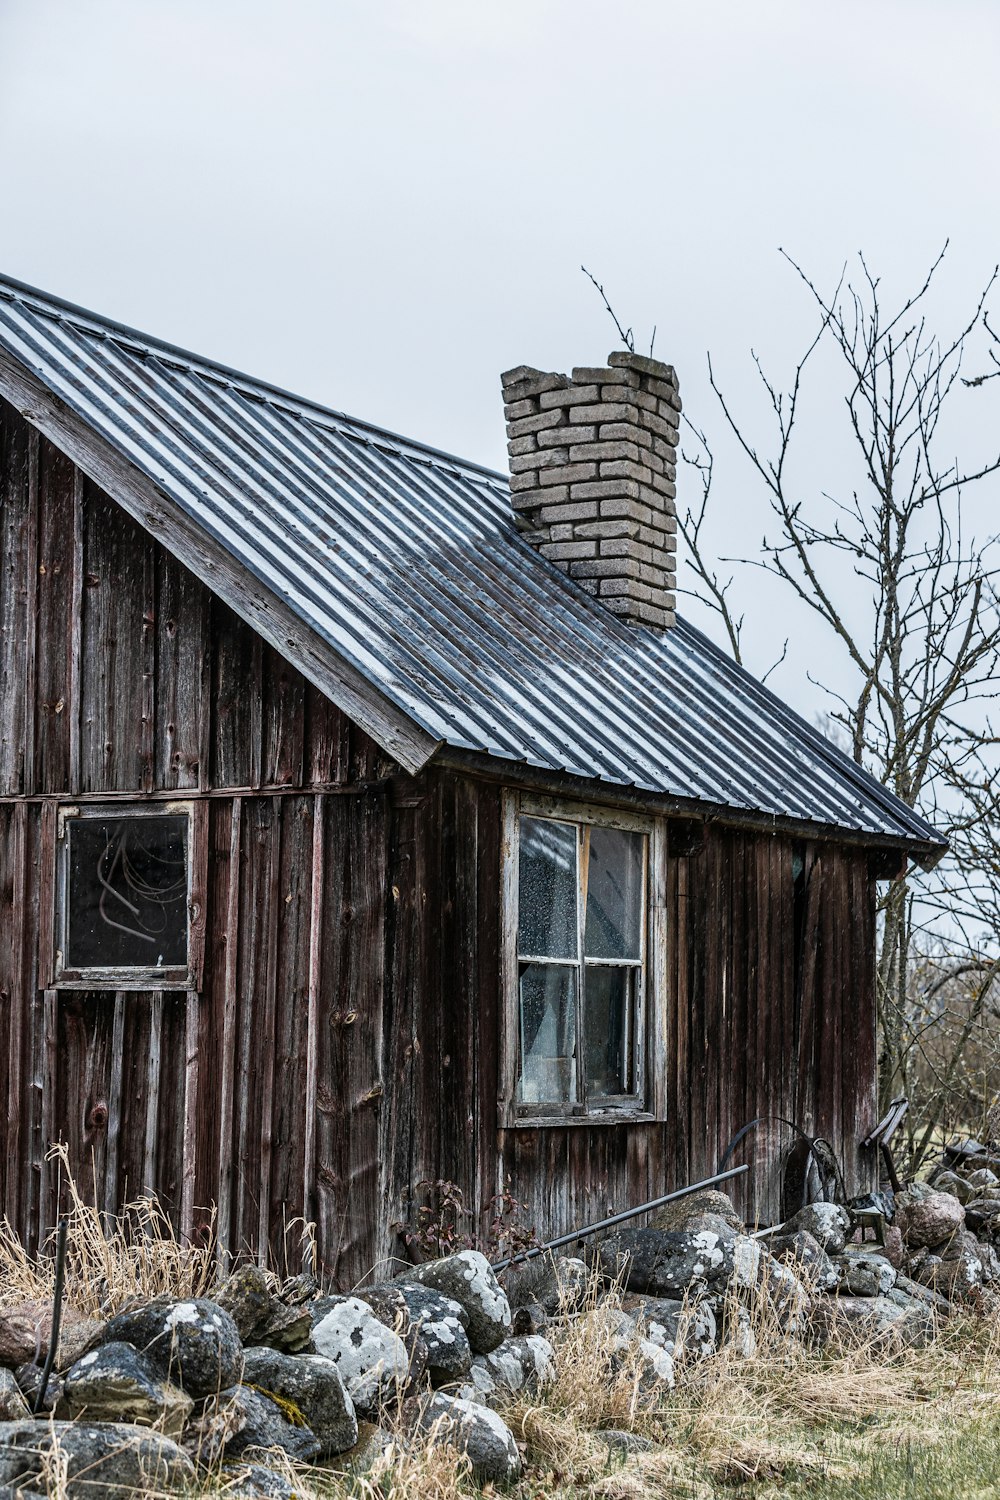 an old wooden house with a metal roof